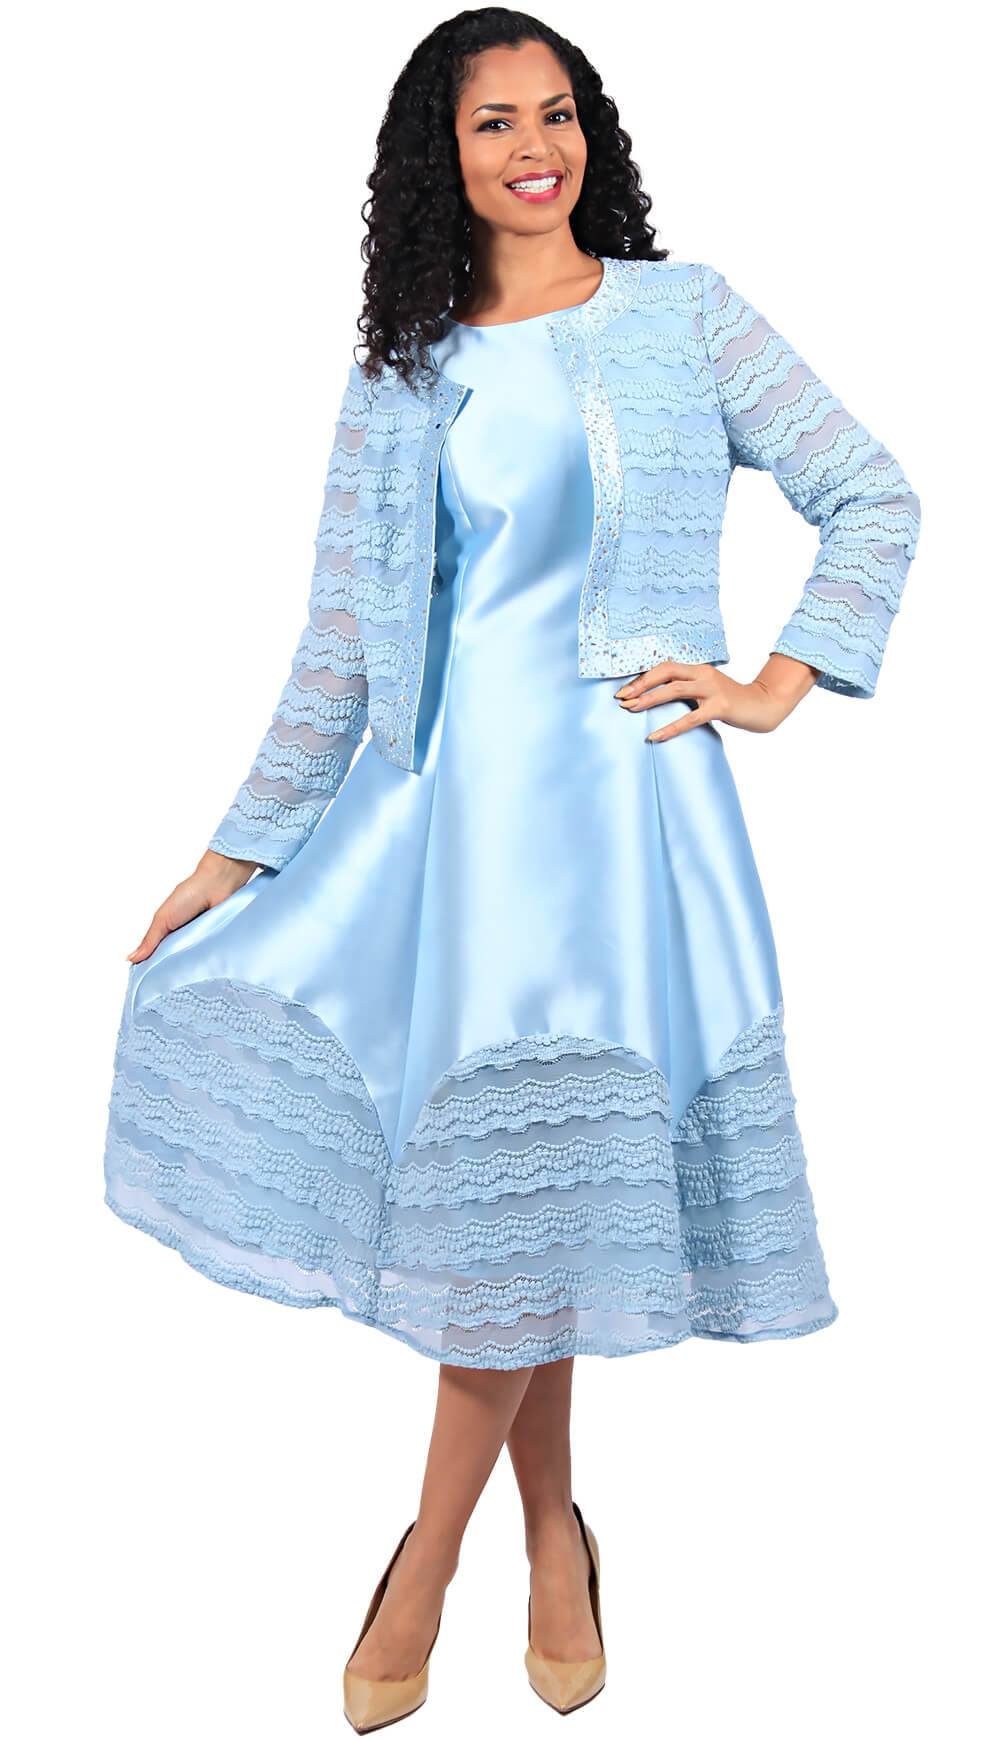 Diana Couture Dress 8686-Sky Blue - Church Suits For Less